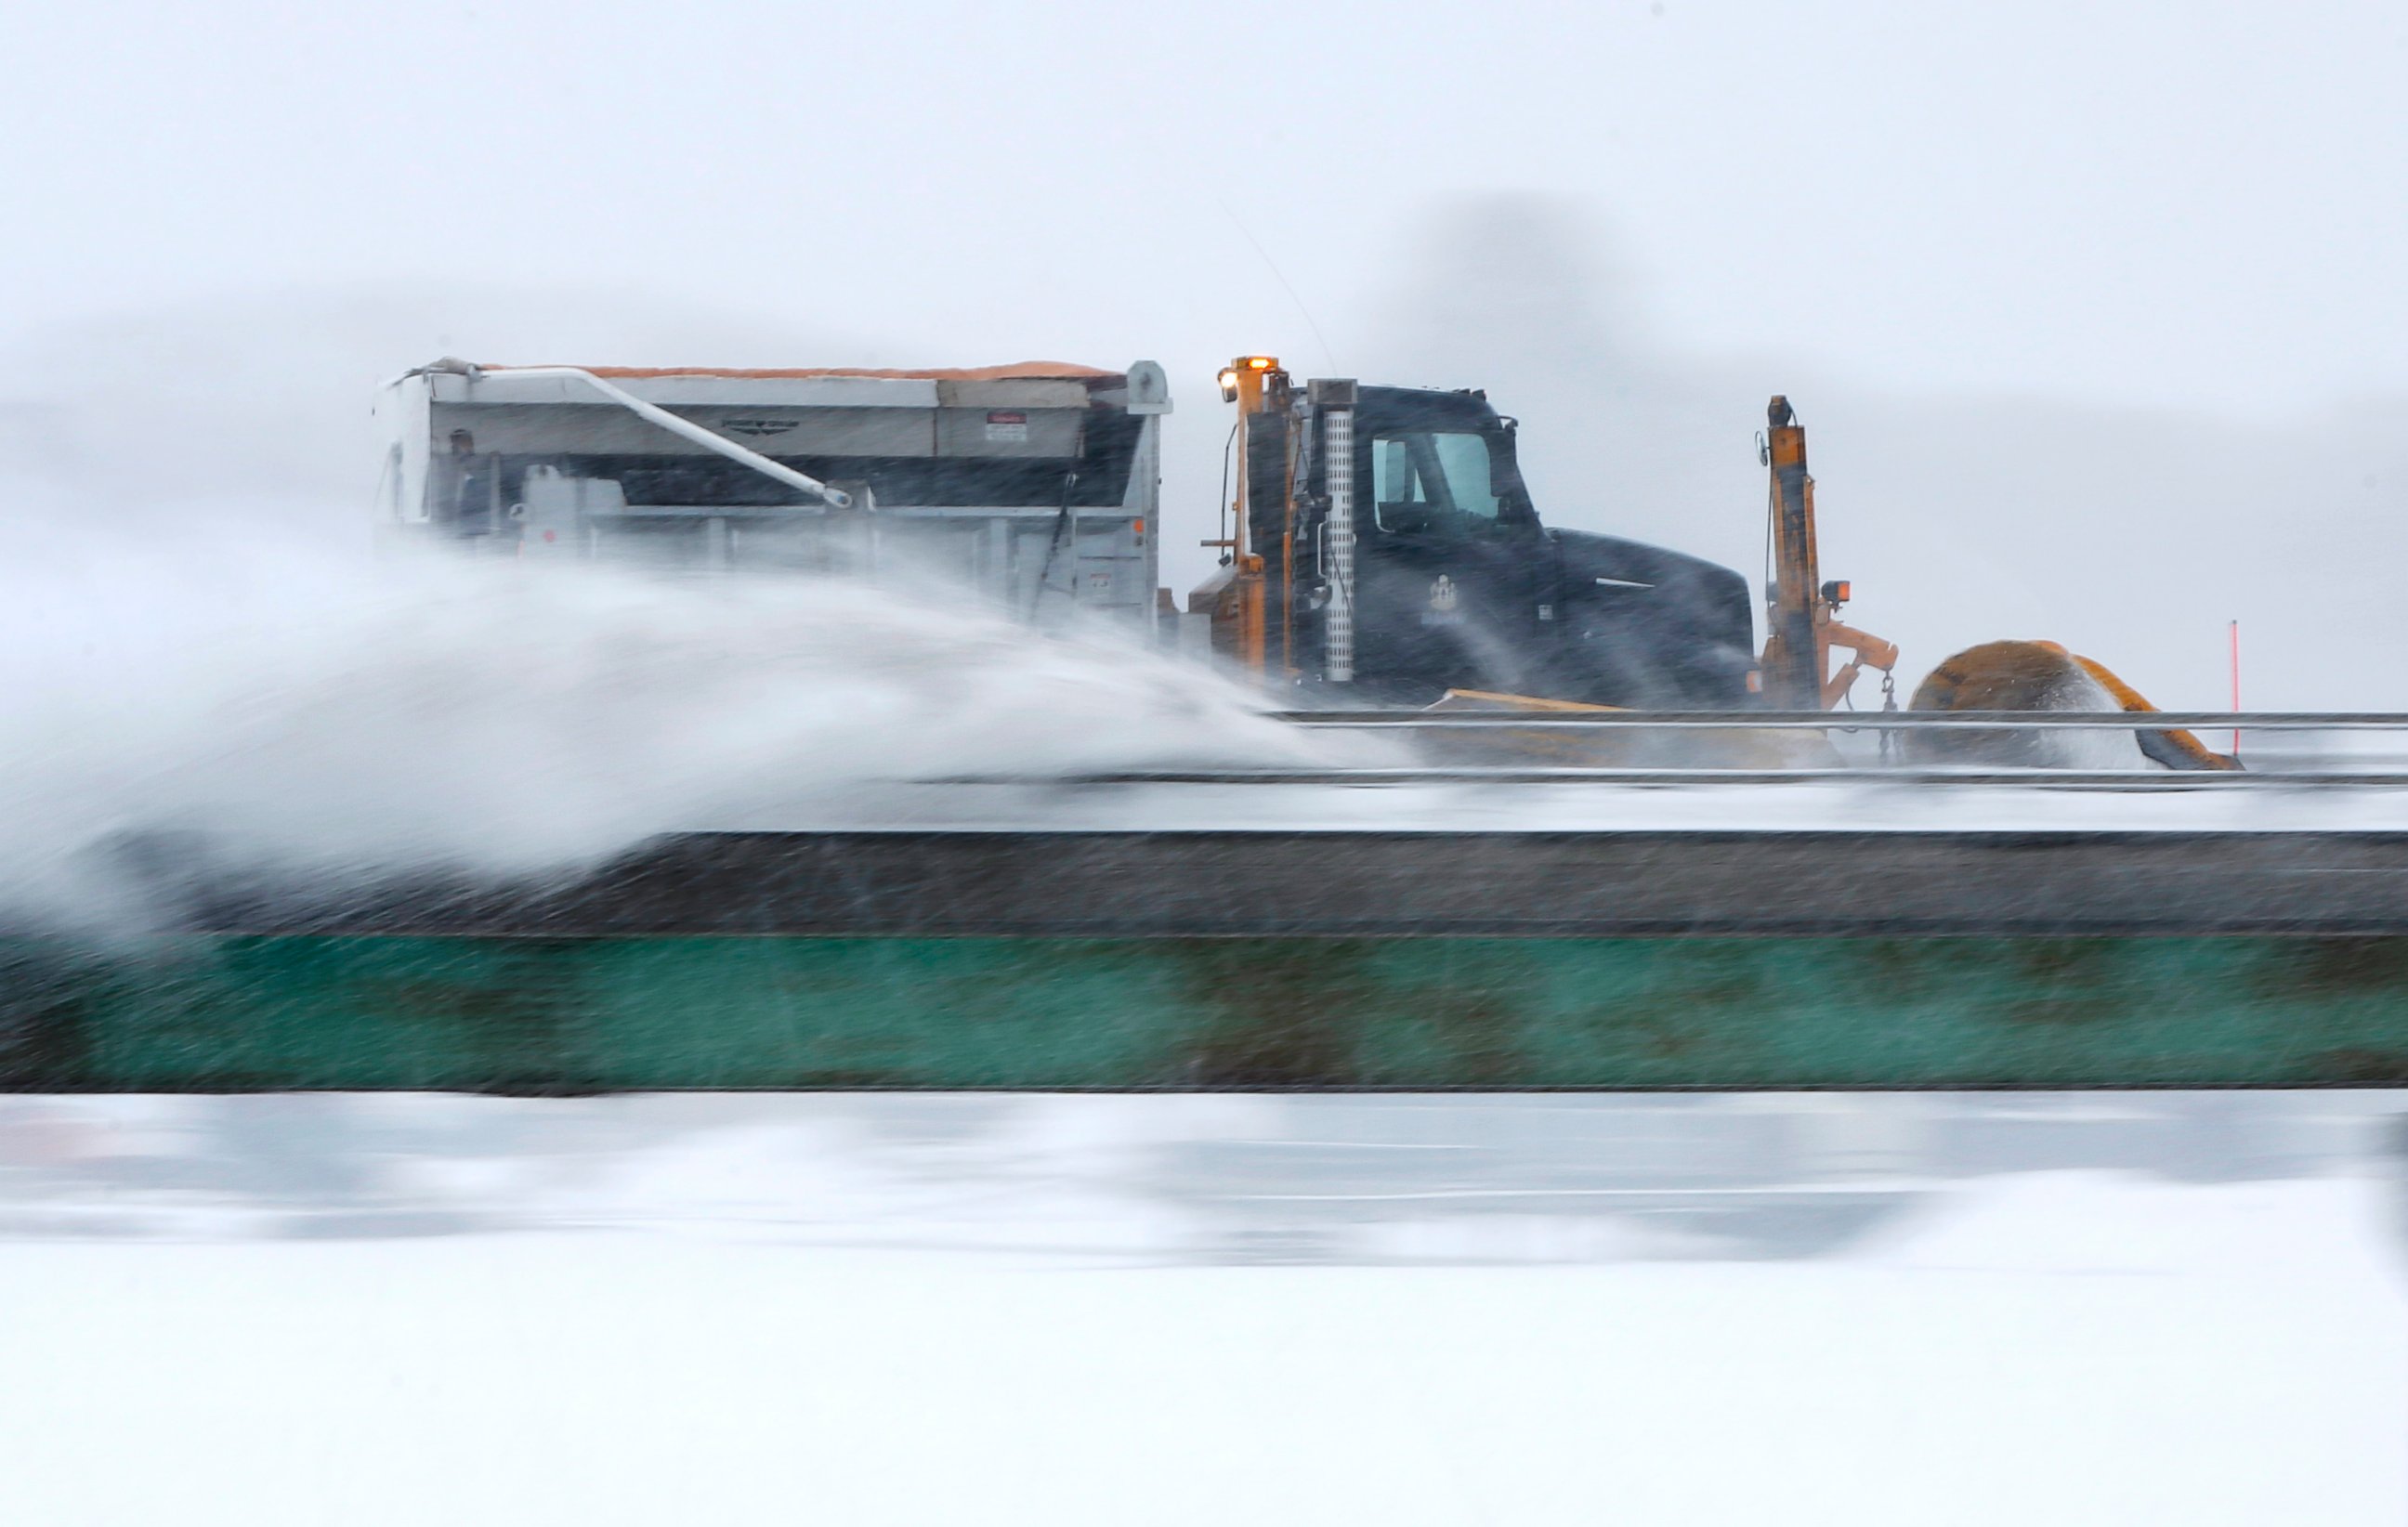 PHOTO: A plow clears snow on I-295 during a winter storm, Feb. 2, 2015, in Yarmouth, Maine.